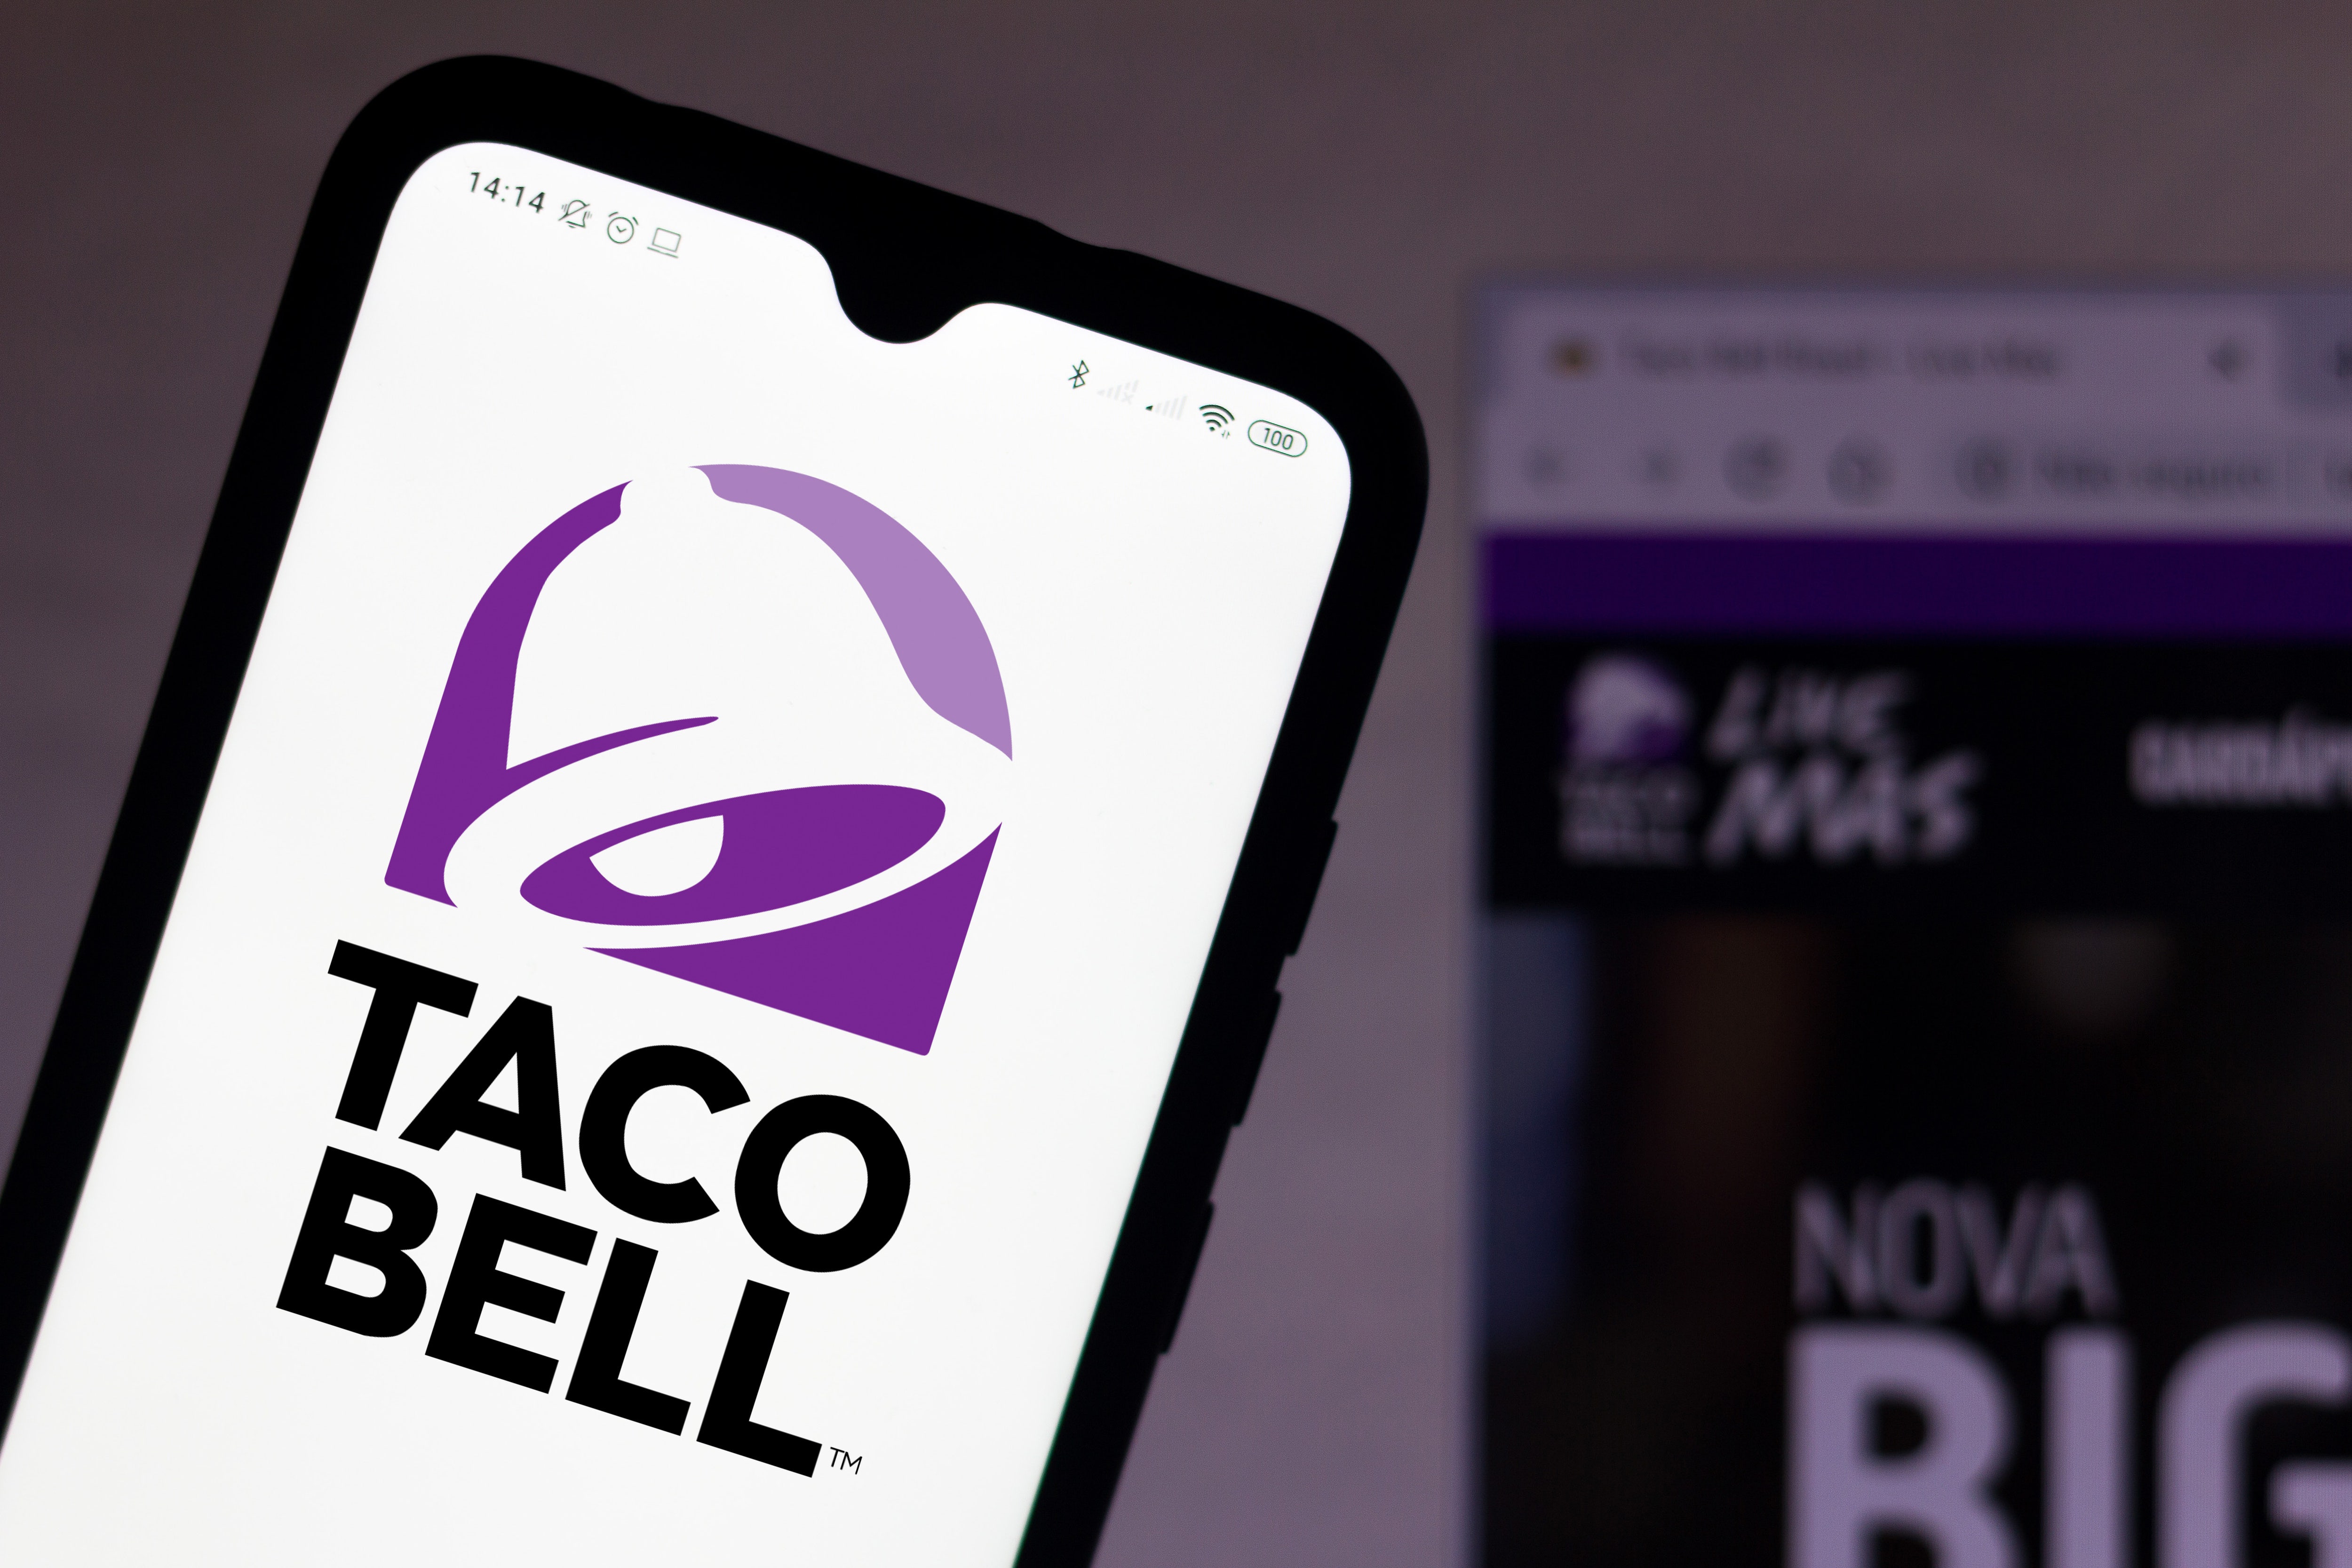 Taco Bell, Pizza Hut, KFC to receive orders via text and social media